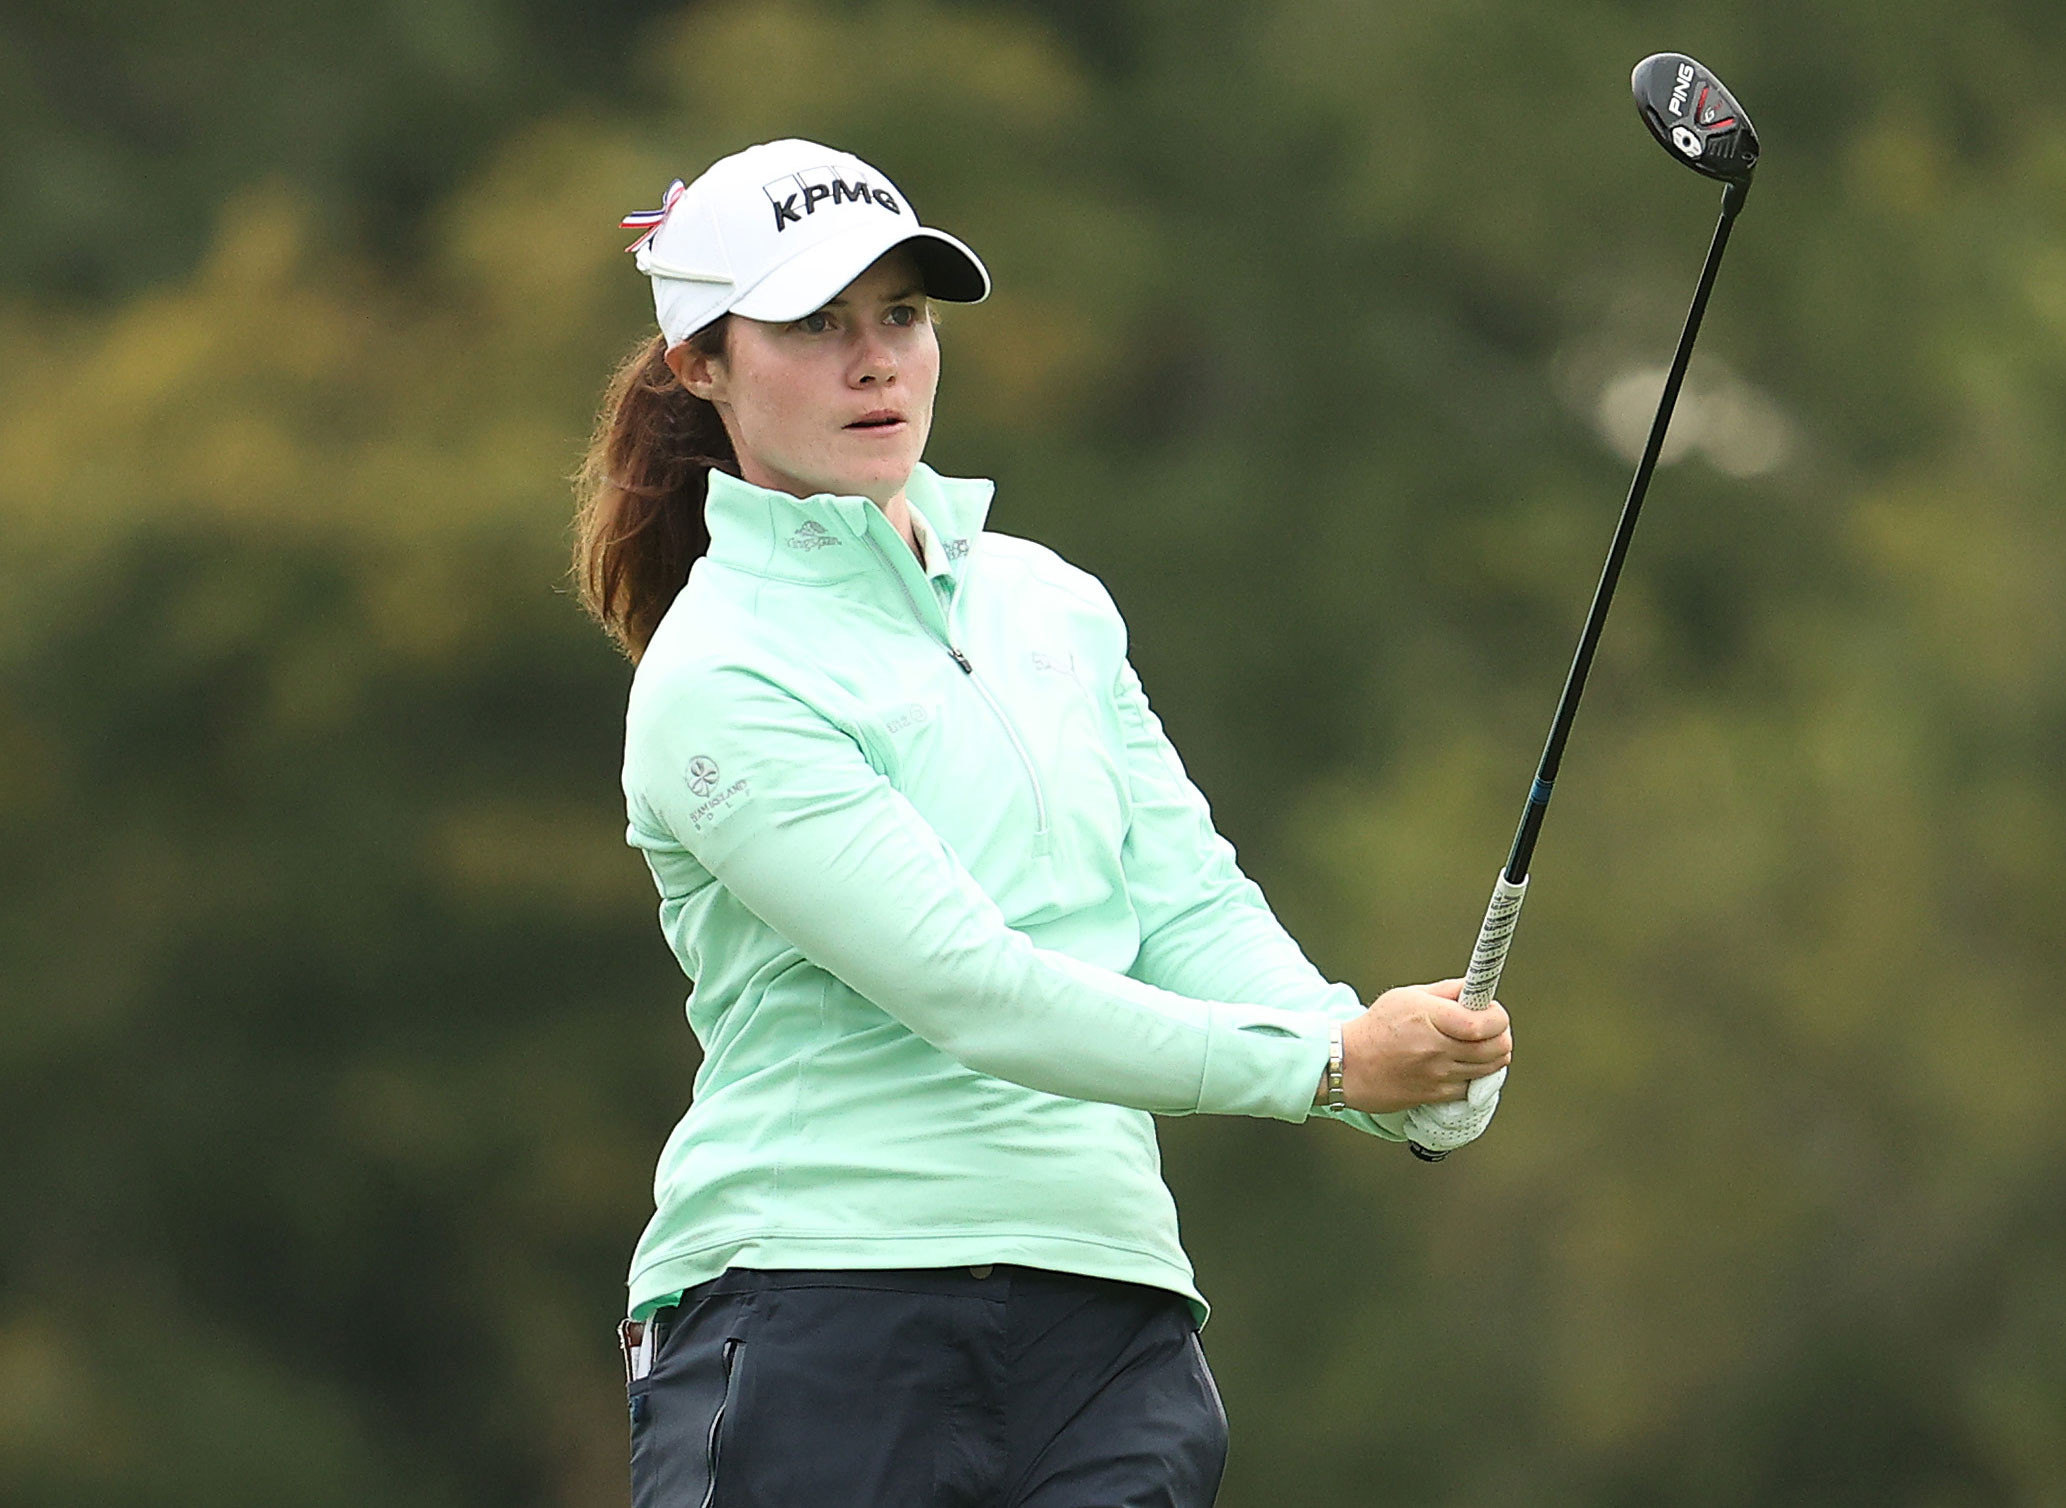 An amateur phenom is beginning to find her way on the LPGA Tour Golf News and Tour Information GolfDigest